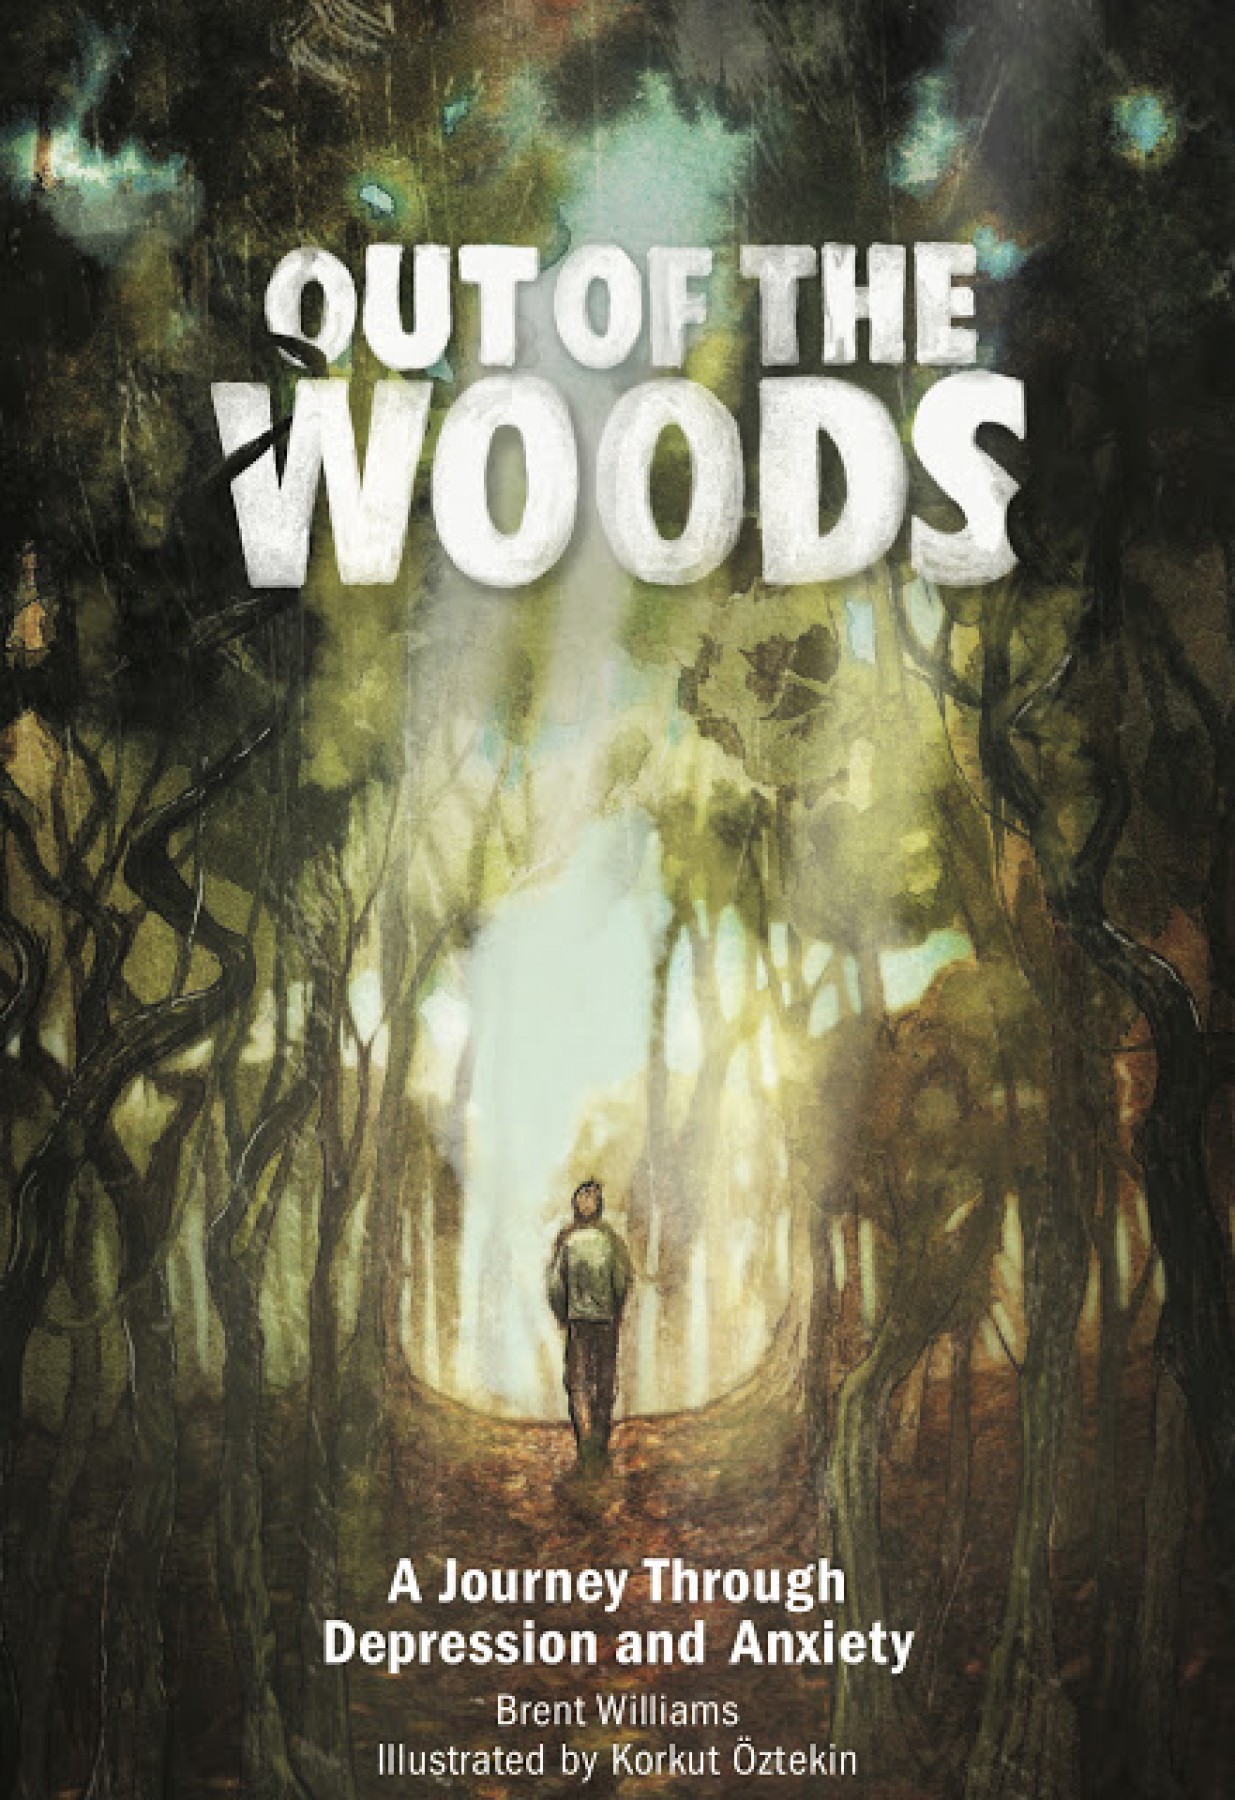 Out of the woods: A journey through depression and anxiety